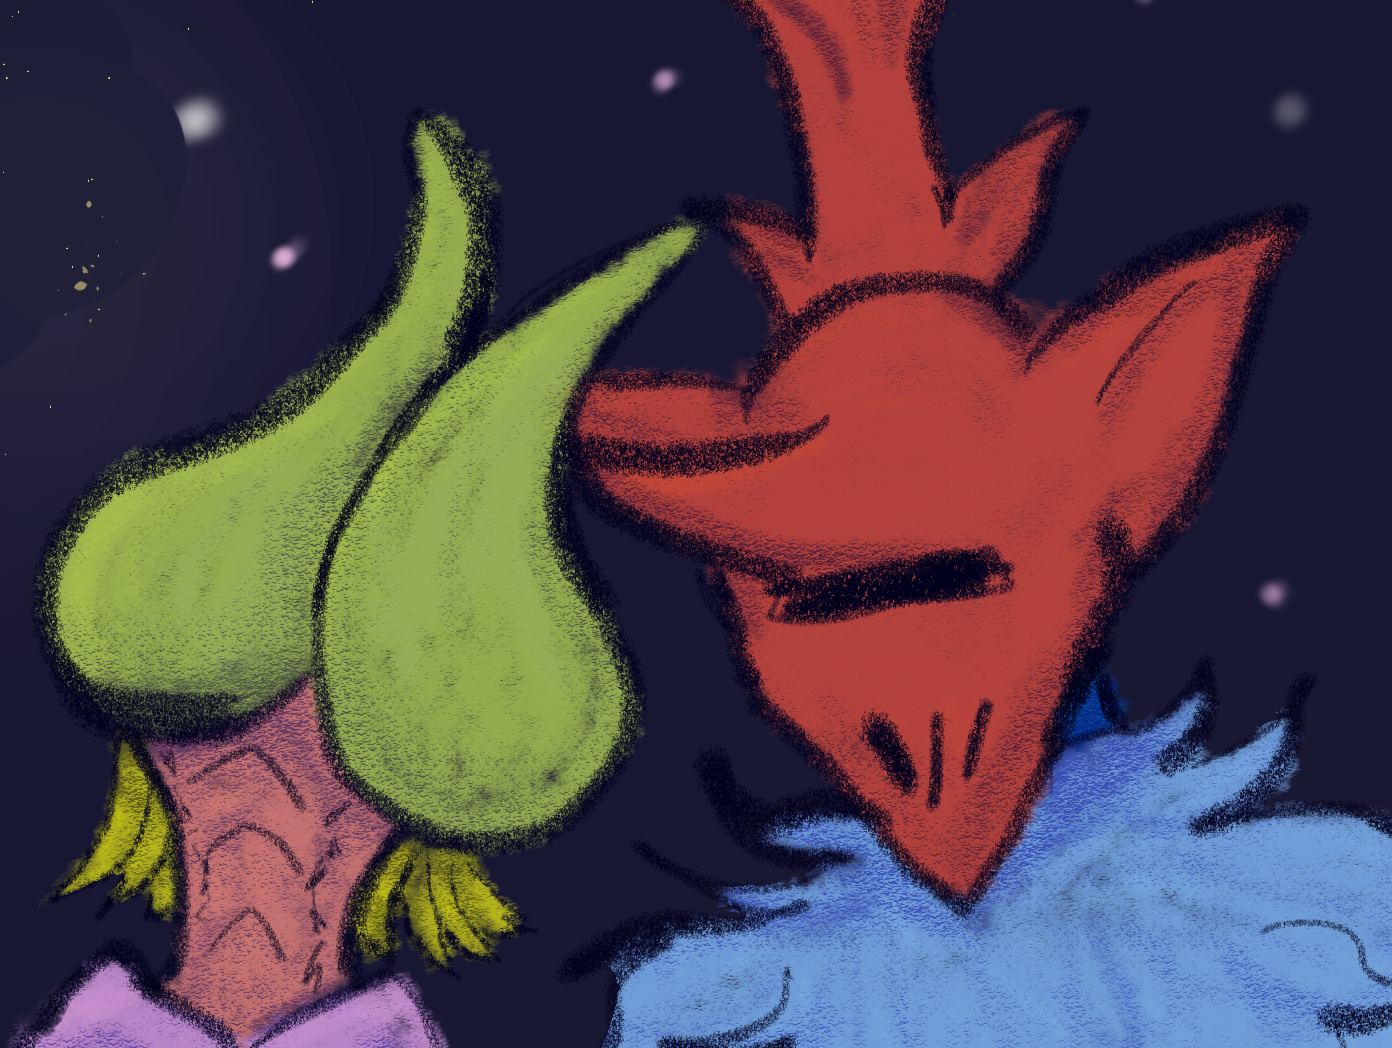 Pongorma and Dedusmuln from the video game Hylics sitting close together.  Pongorma is a large humanoid with a blue fur gambeson and a red, fish shaped helmet. He has and arm around Dedusmuln's shoulder. Dedusmuln is a humanoid with yellow-green horns that curve inward covering where their eyes would be. Coming from under the green horns are yellow hairlike structures. Their face has no defining features, but they have what looks like gills running down the front of their orange body.